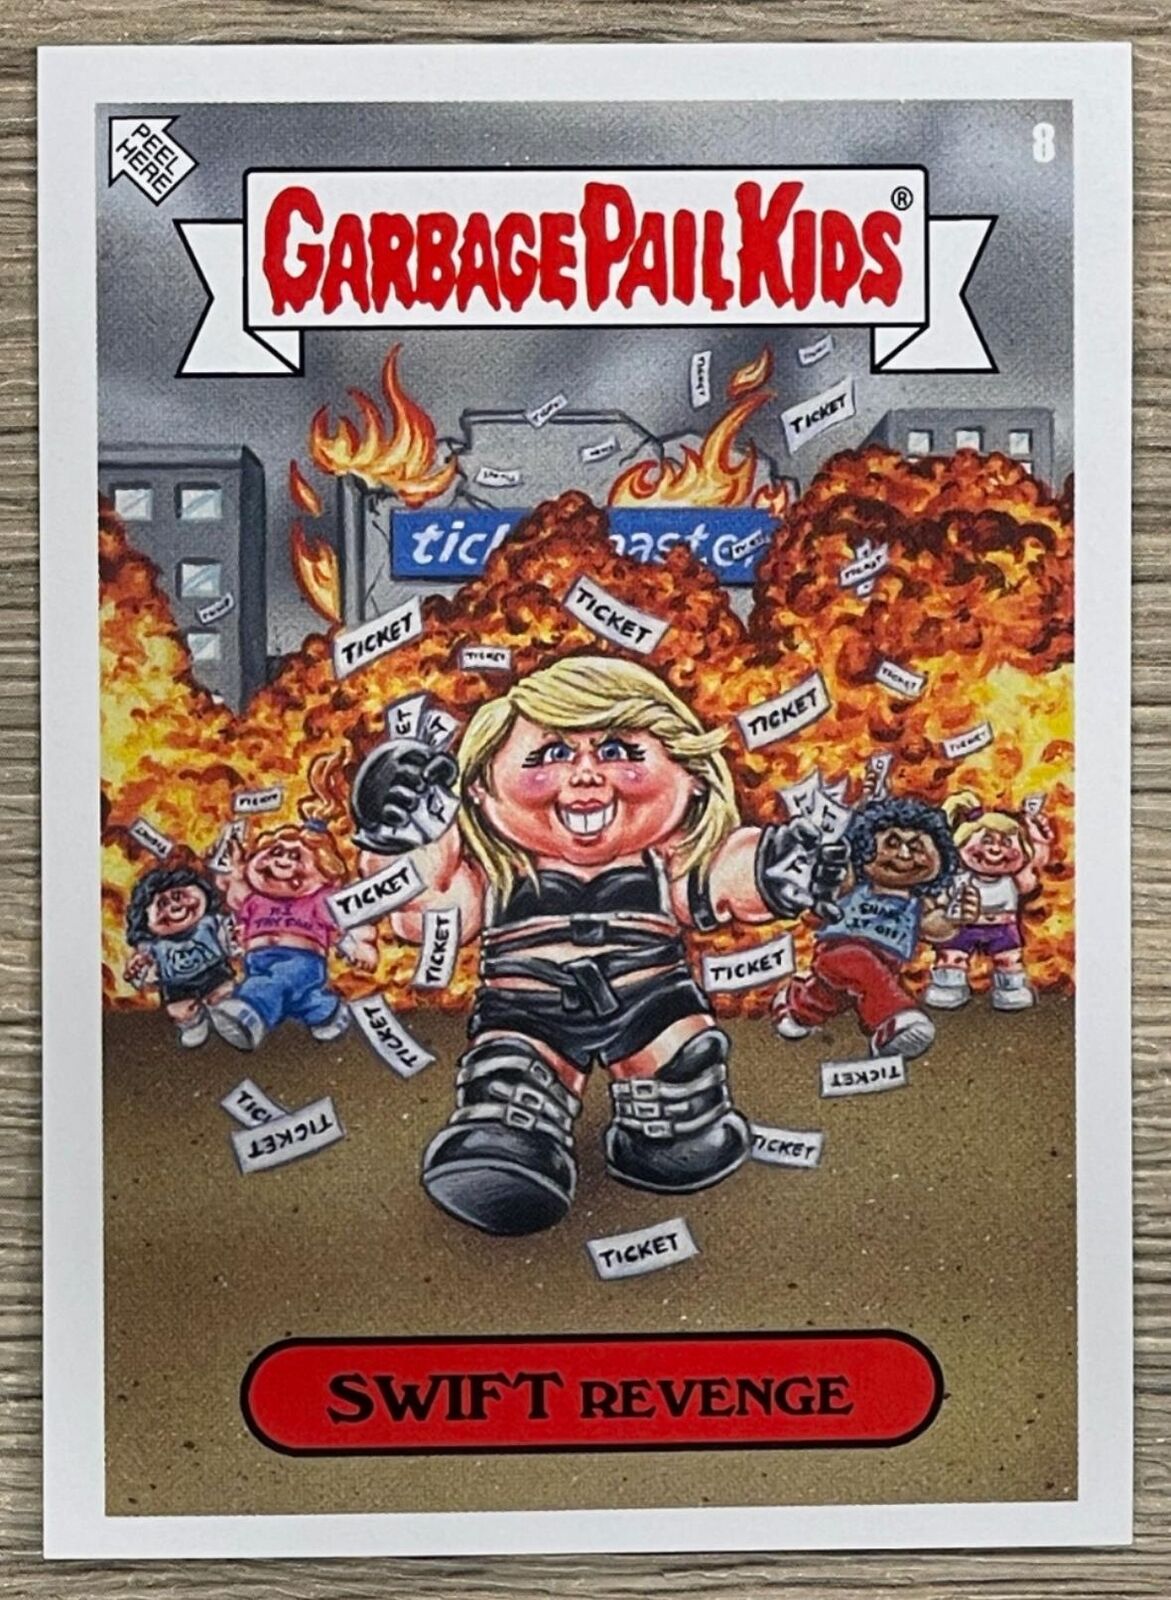 2022 Topps Garbage Pail Kids GPK 2022 Was the Worst #8 Taylor Swift Revenge